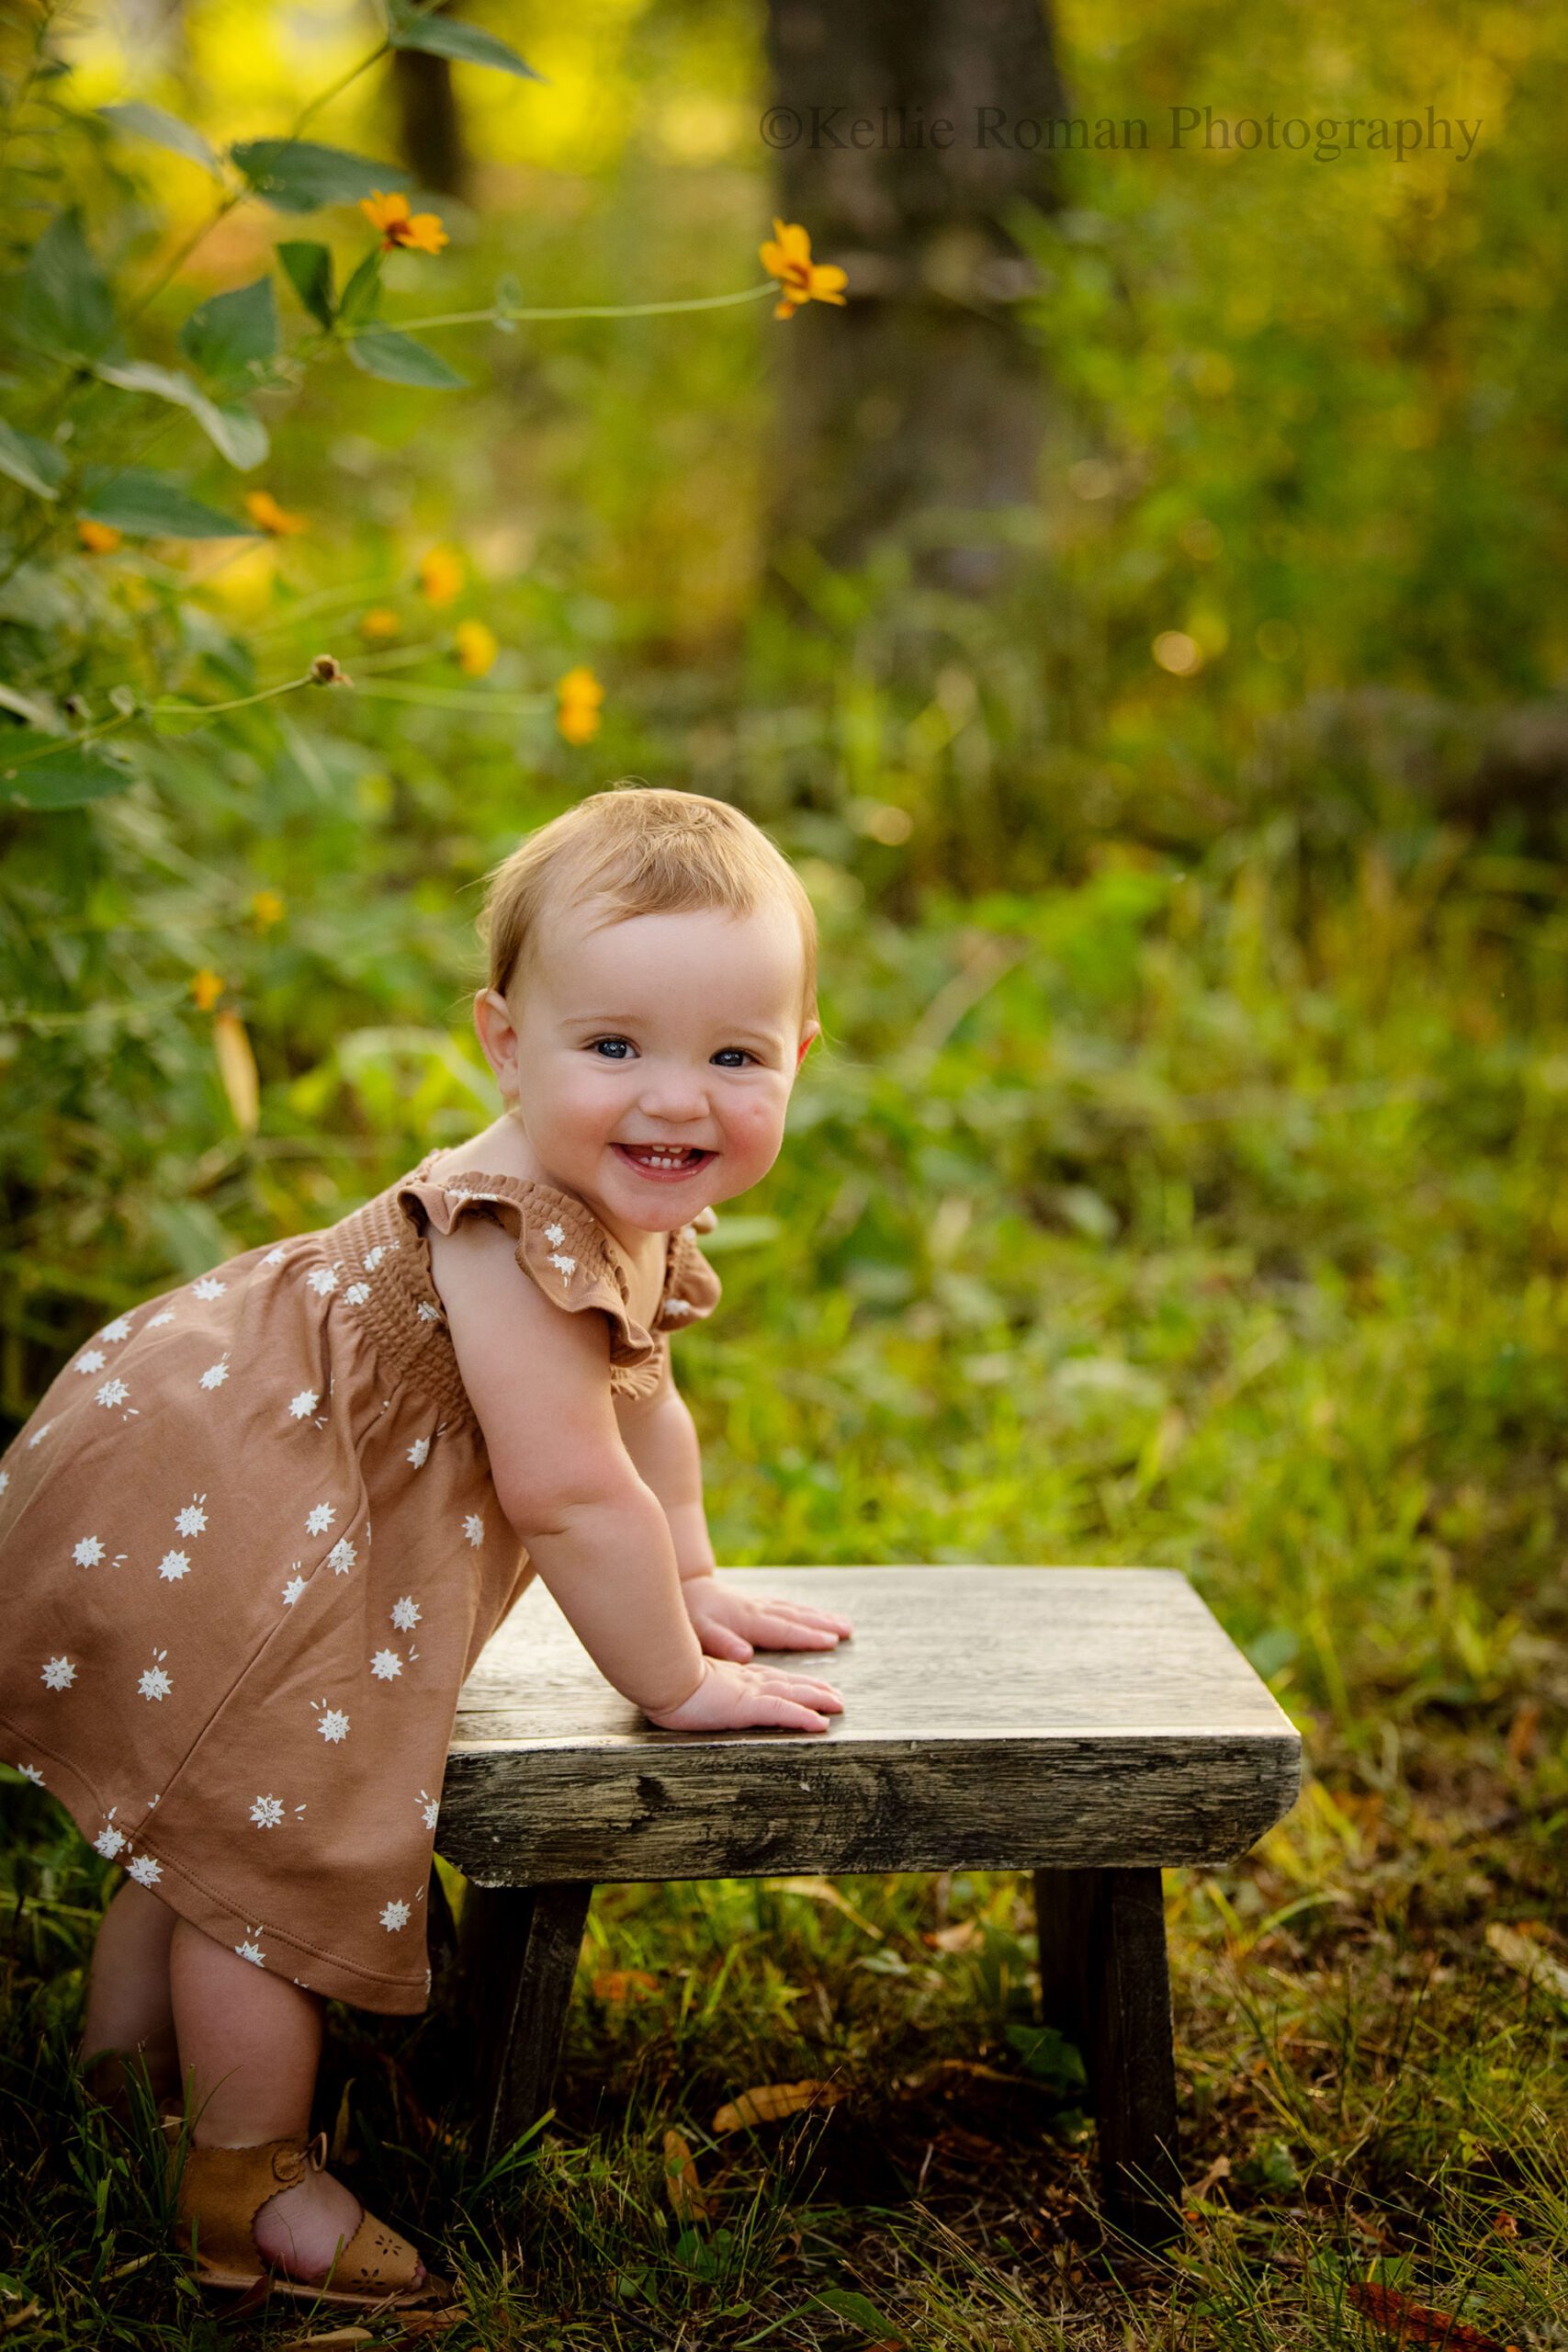 milwaukee child photographer. one year old girl standing while holding onto a wood stool. girl is surrounded by green grass in a park. she has a brown dress on with white flowers and is smiling very big. 